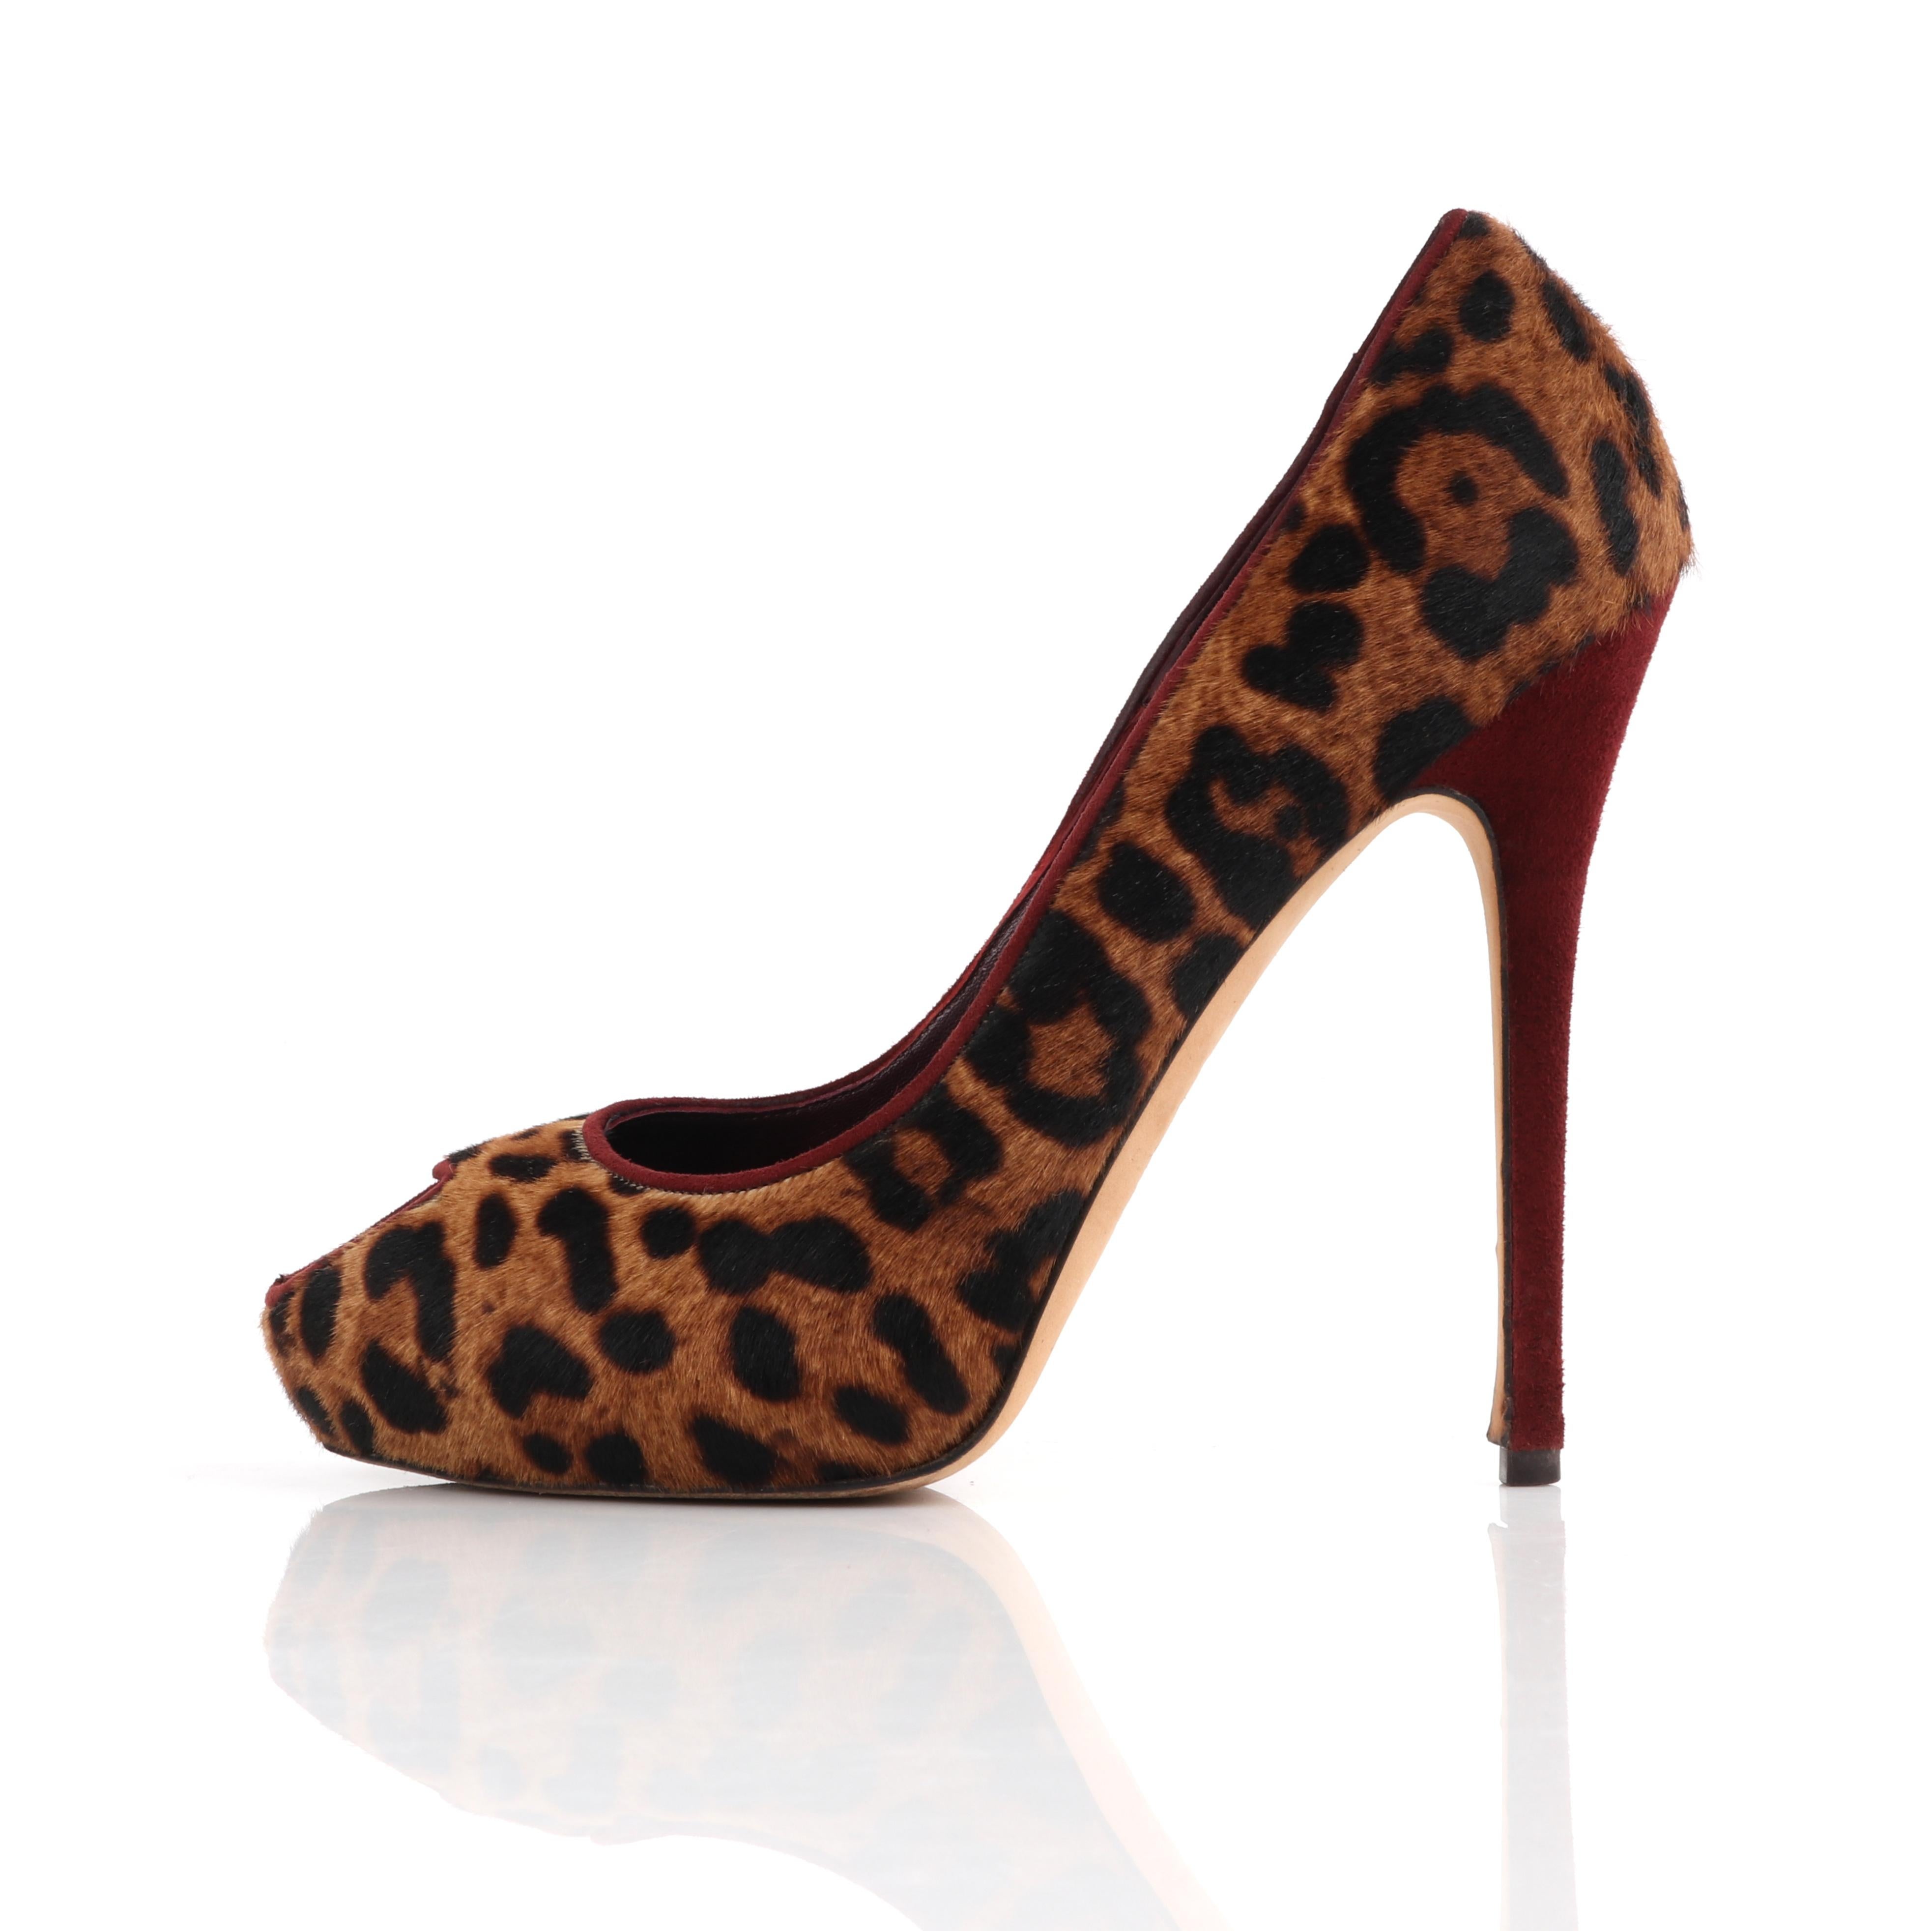 ALEXANDER McQUEEN A/W 2011 Leopard Pony Hair Heart Peep Toe Platform Pumps Shoes In Good Condition For Sale In Thiensville, WI